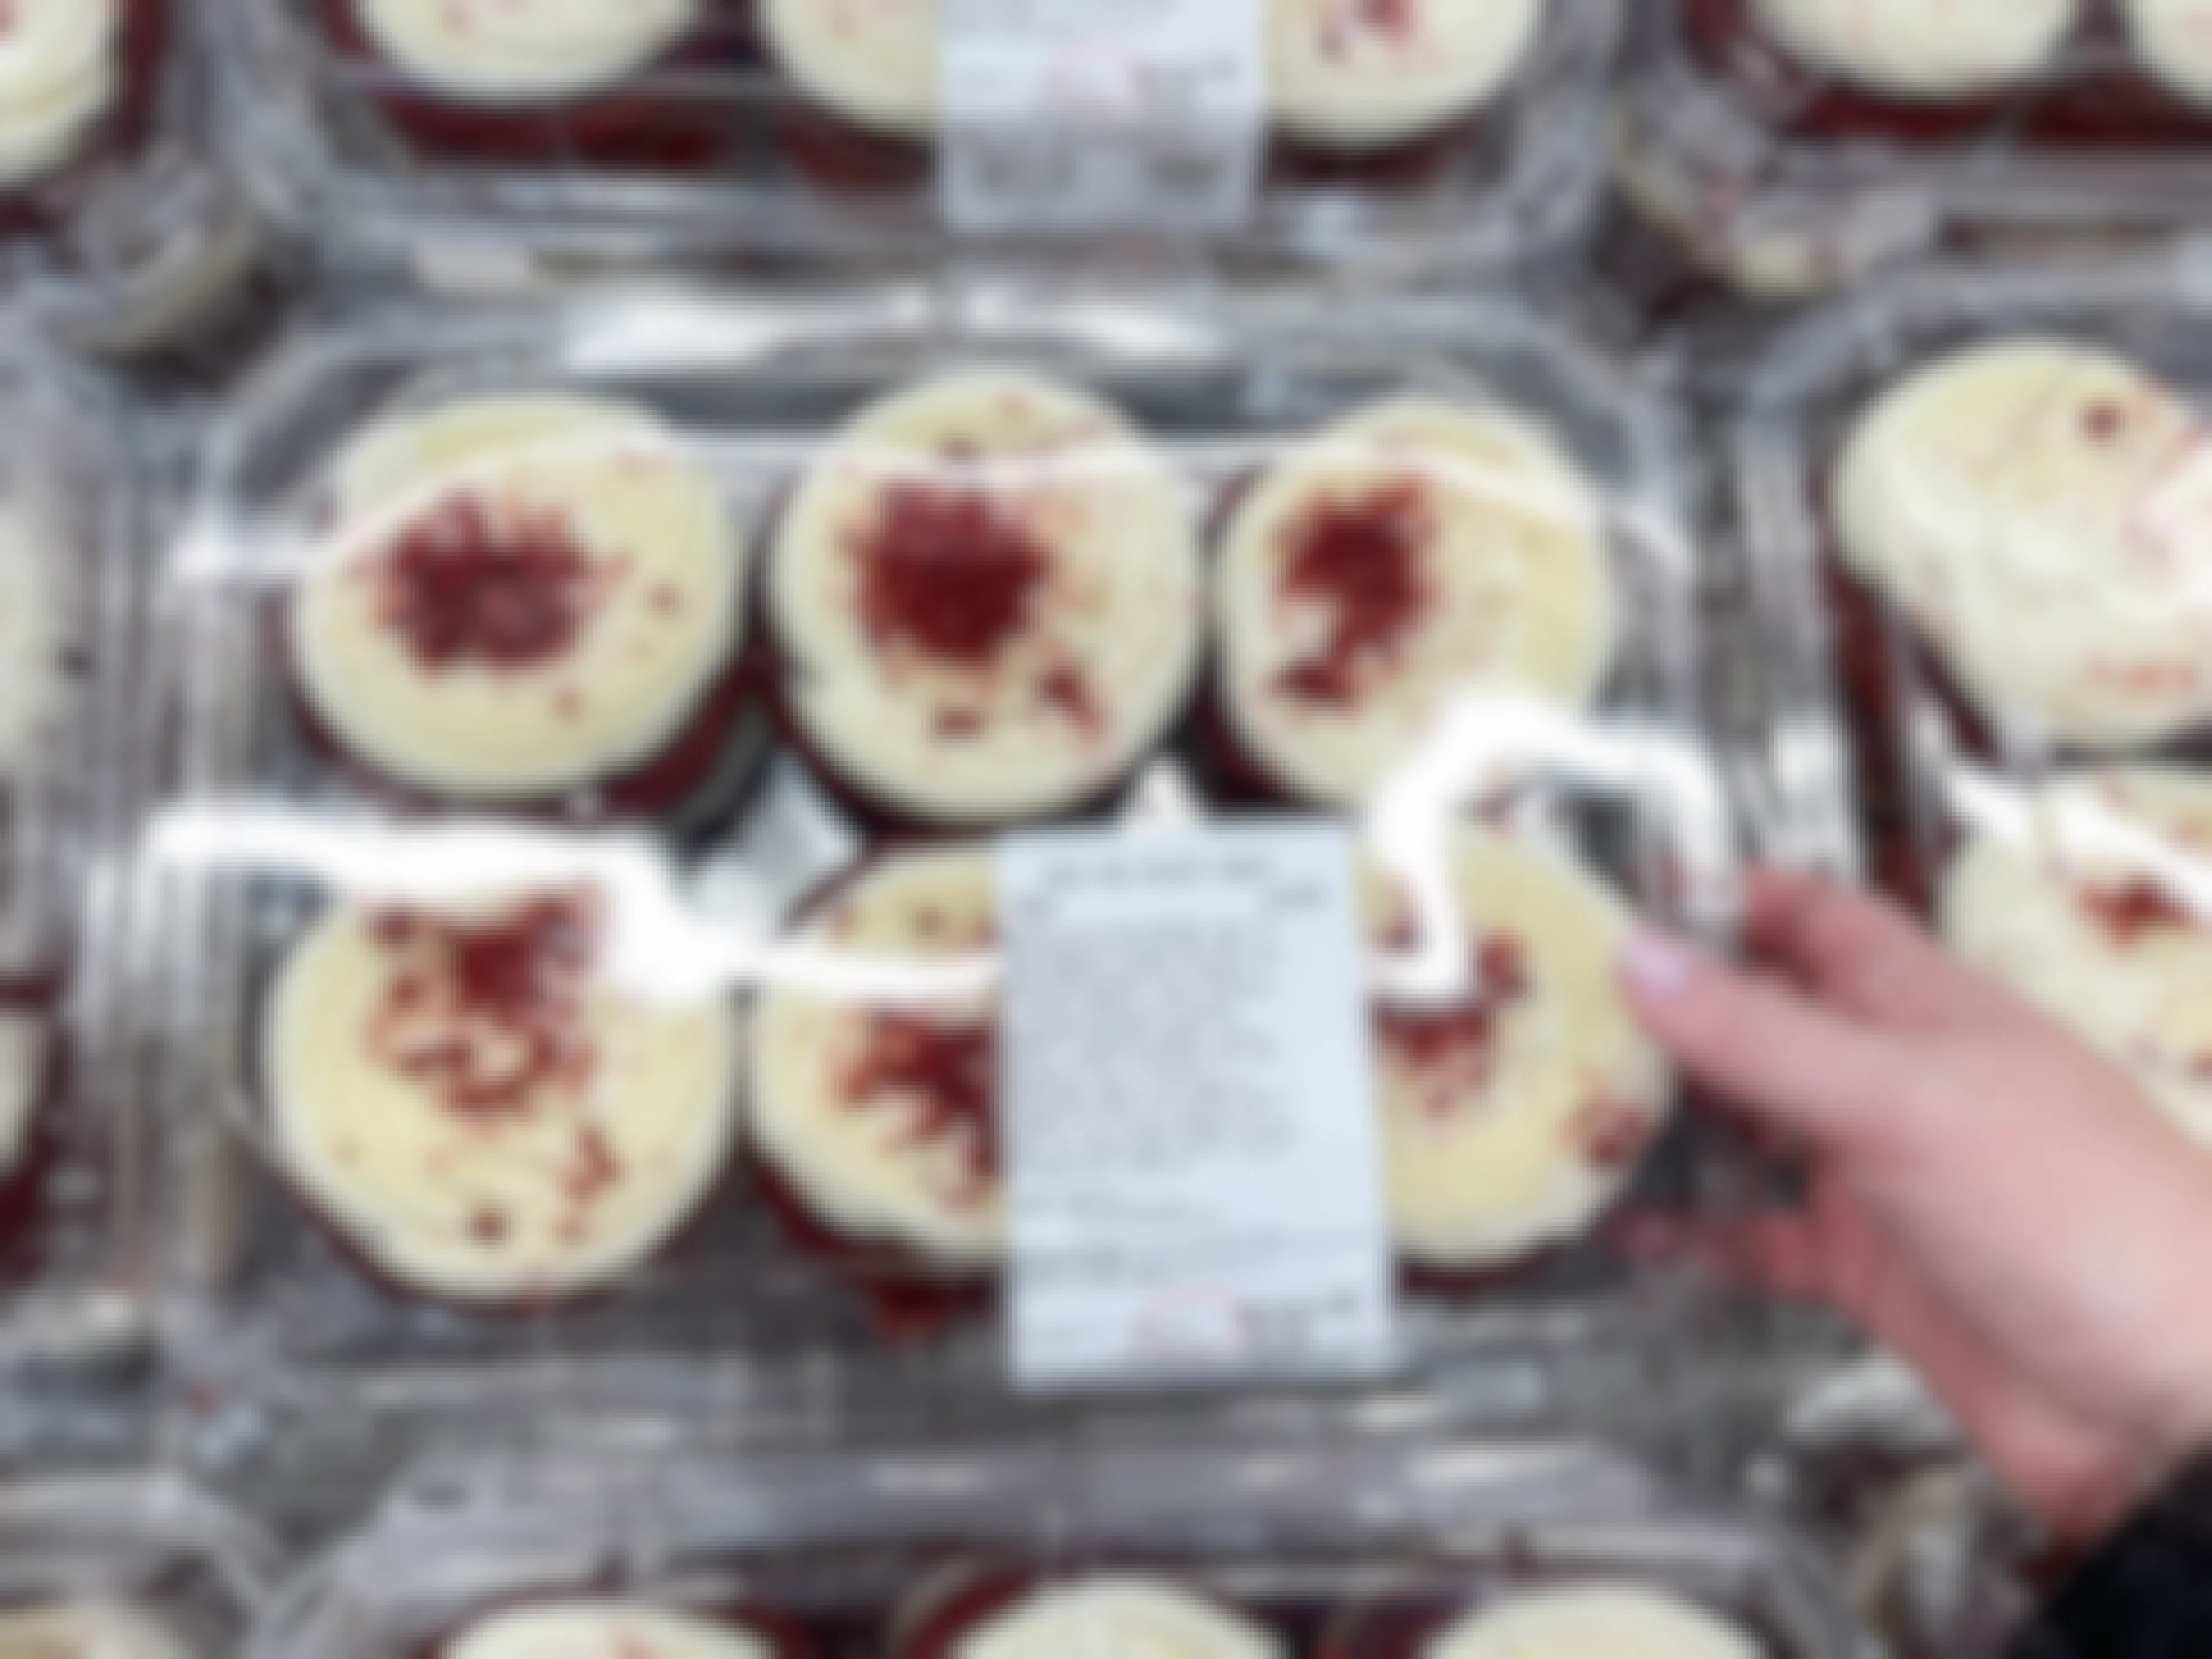 A person grabbing a package of red velvet min cake from dessert area in store 